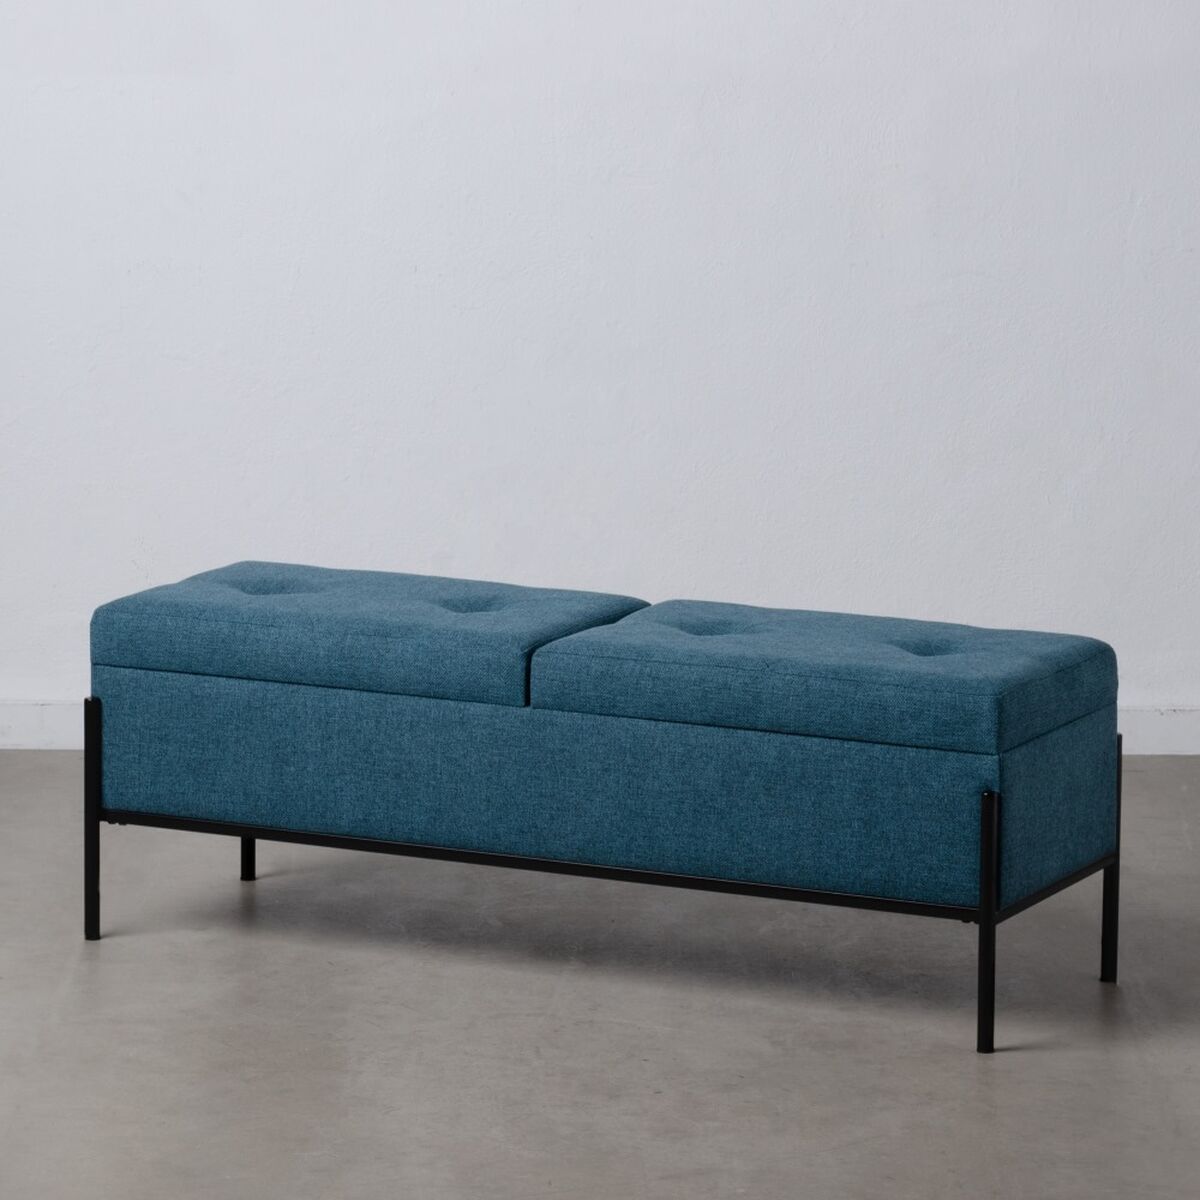 Blue Bench with Storage and Black Metal Legs (123 x 40 x 43 cm)